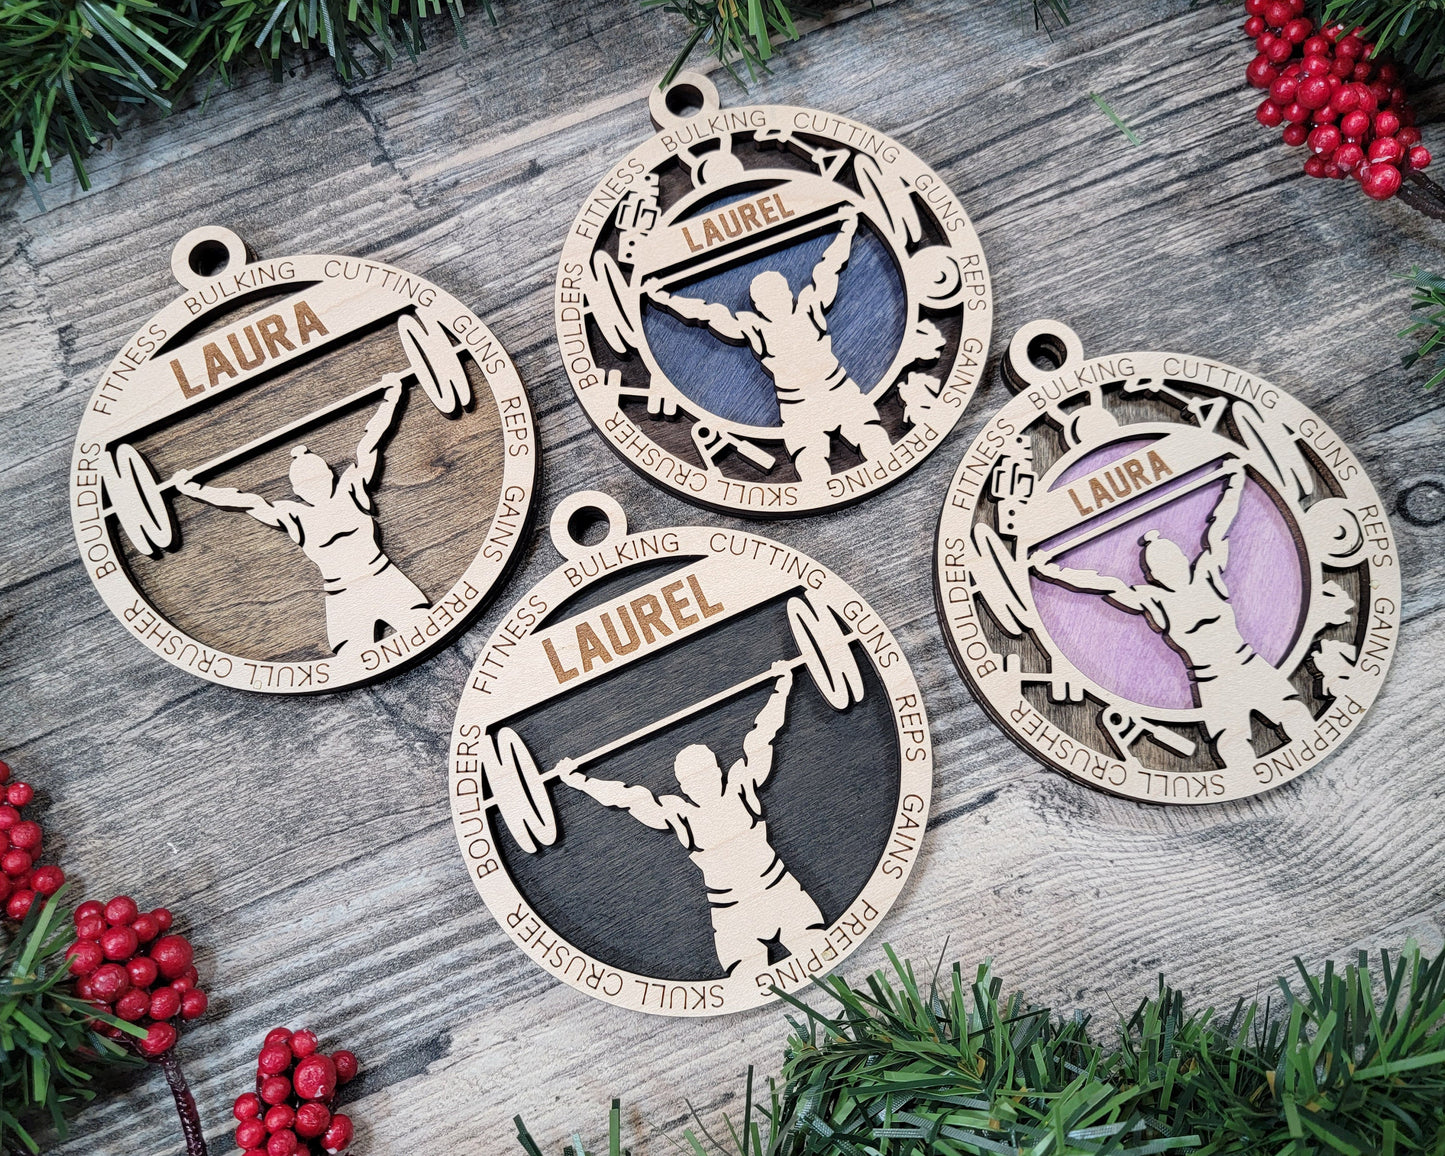 Weight Lifting - Stadium Series Ornaments - 4 Unique designs - SVG, PDF, AI File Download - Sized for Glowforge